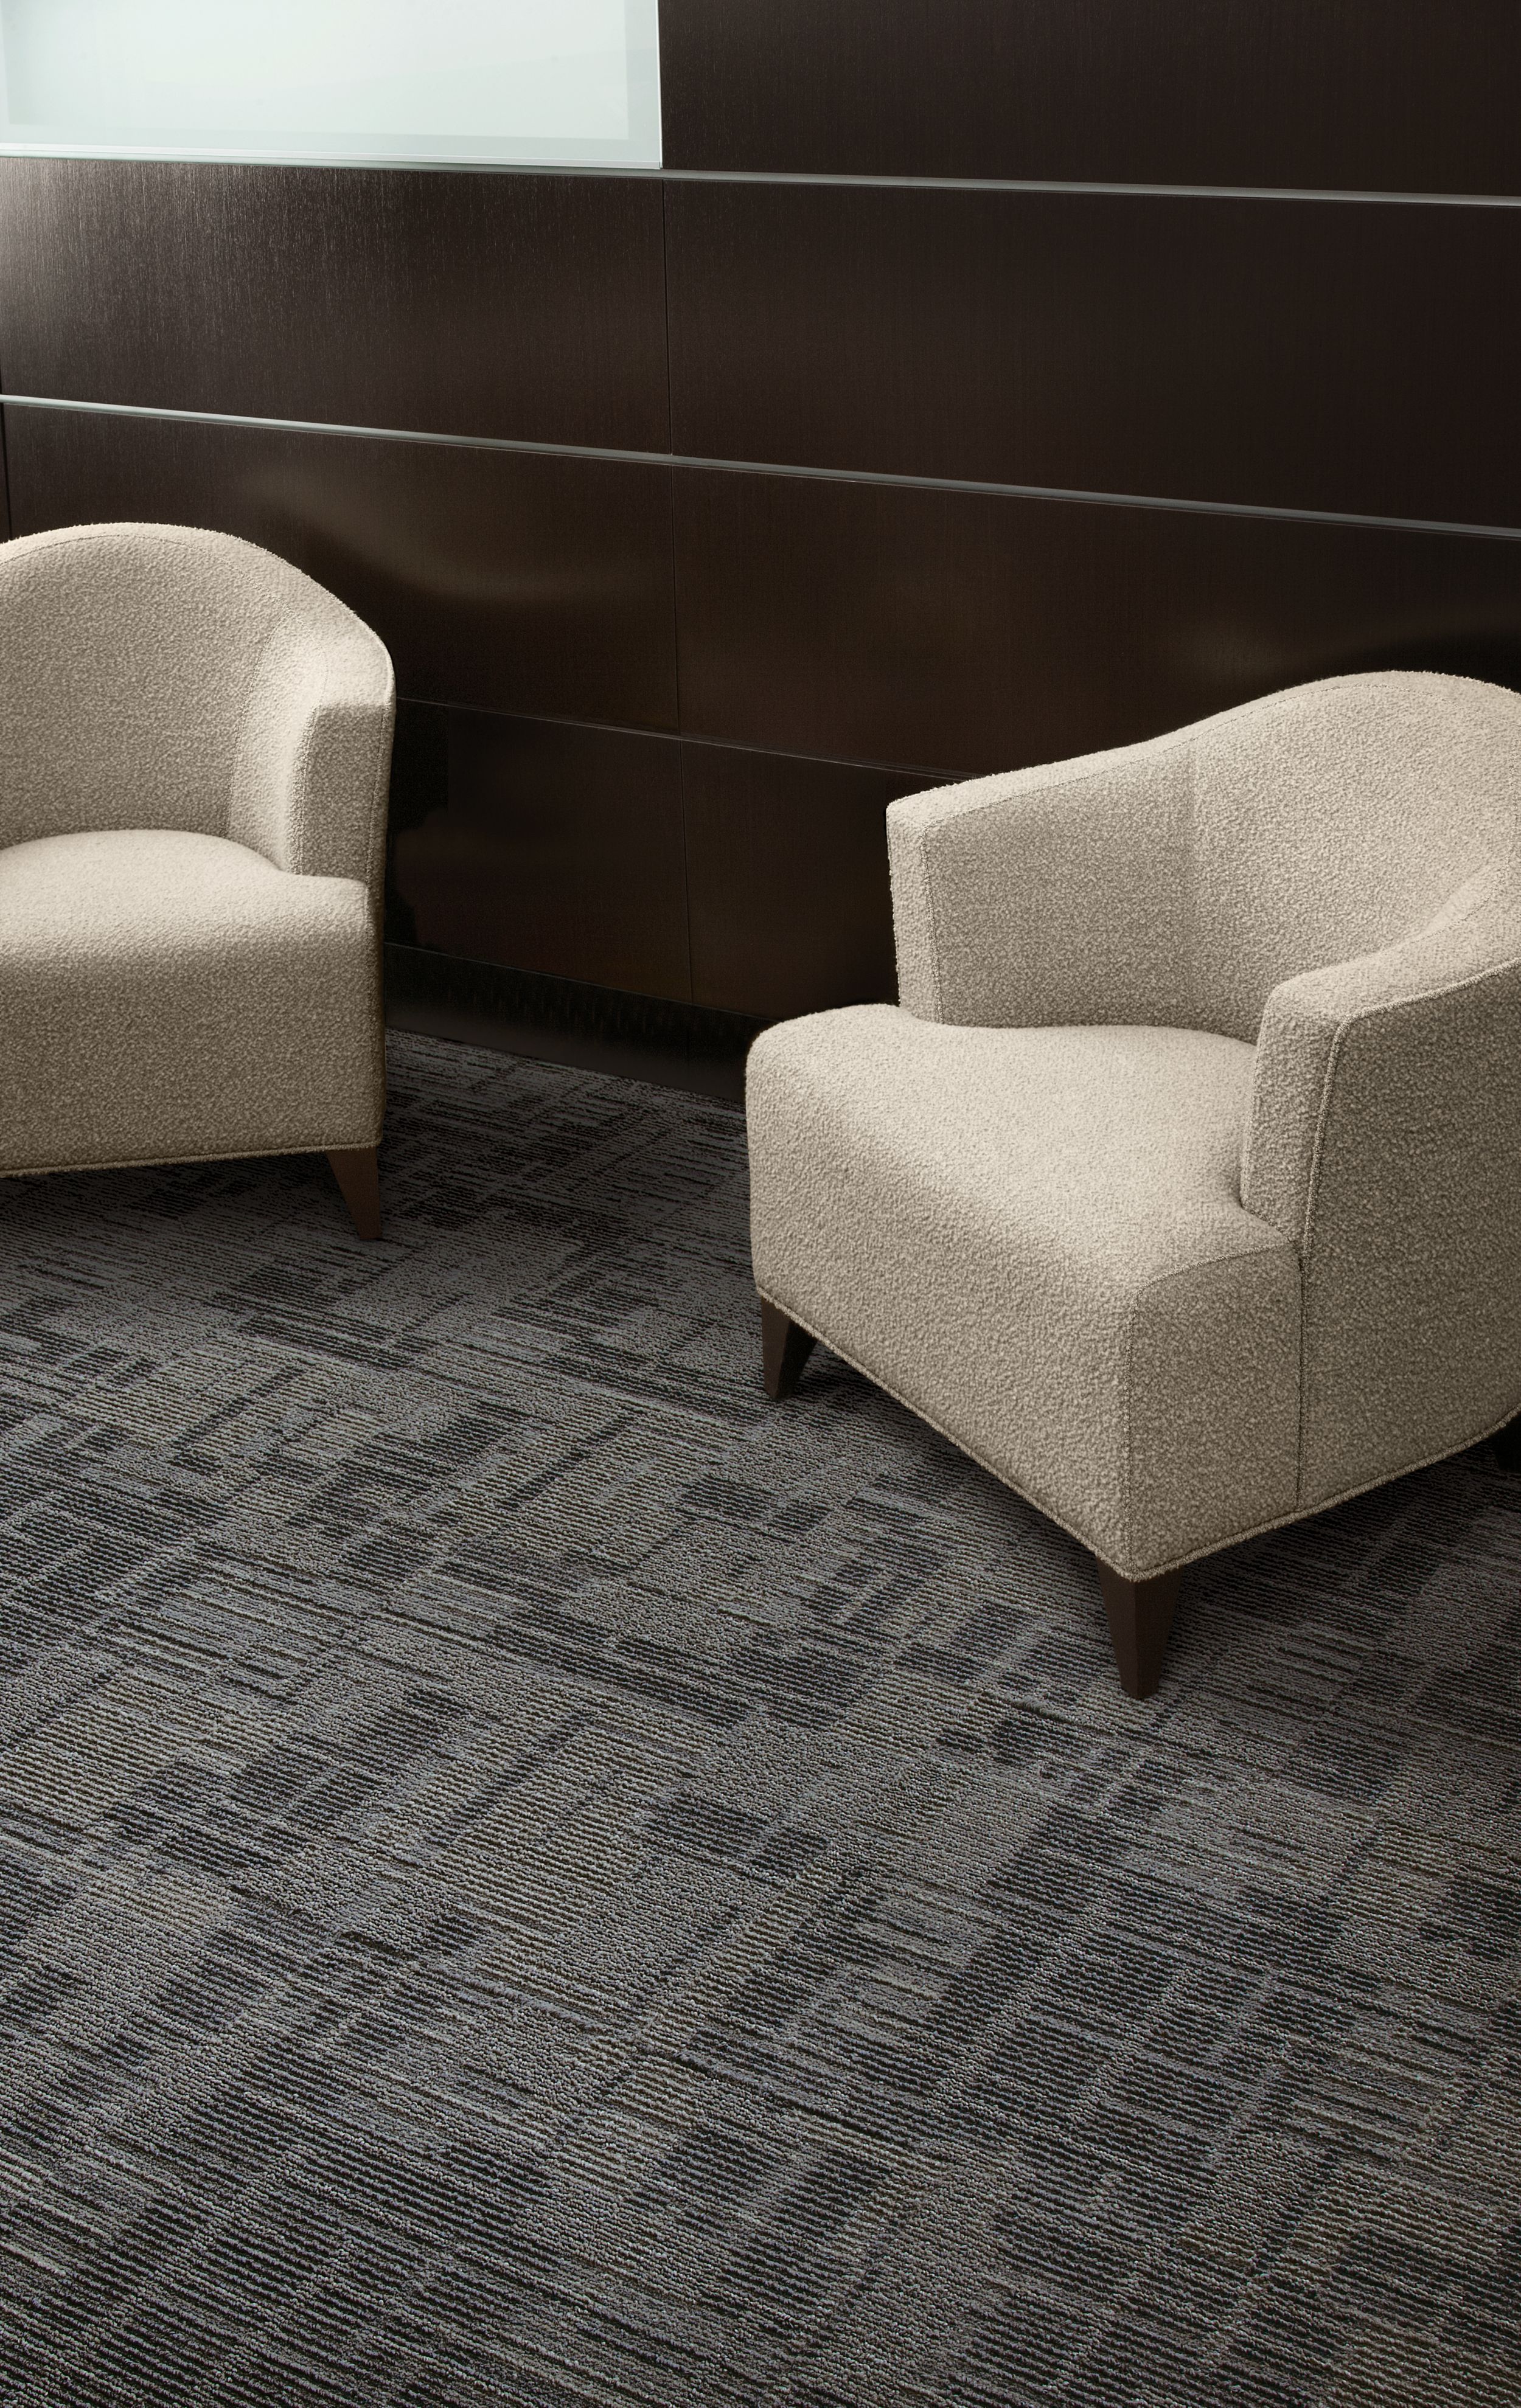 Interface Syncopation carpet tile in seating area with two chairs and wood walls numéro d’image 12